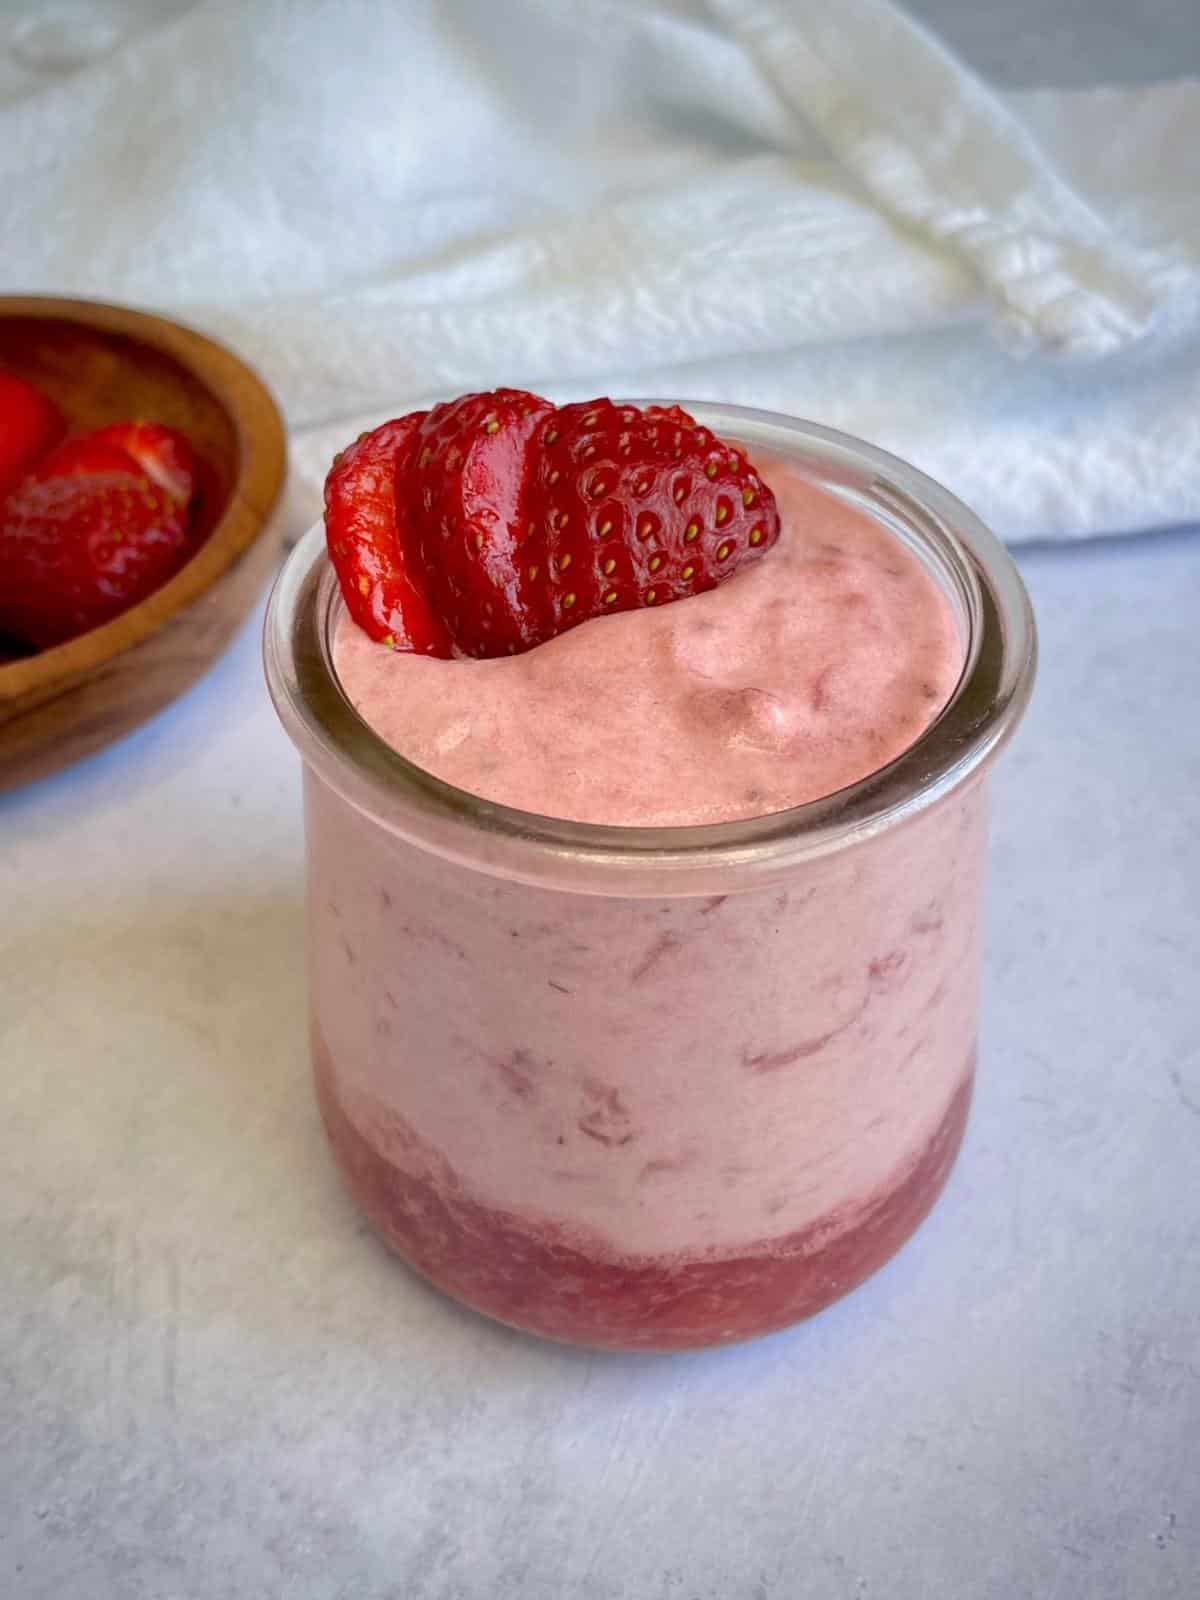 Vegan strawberry mousse in a jar.